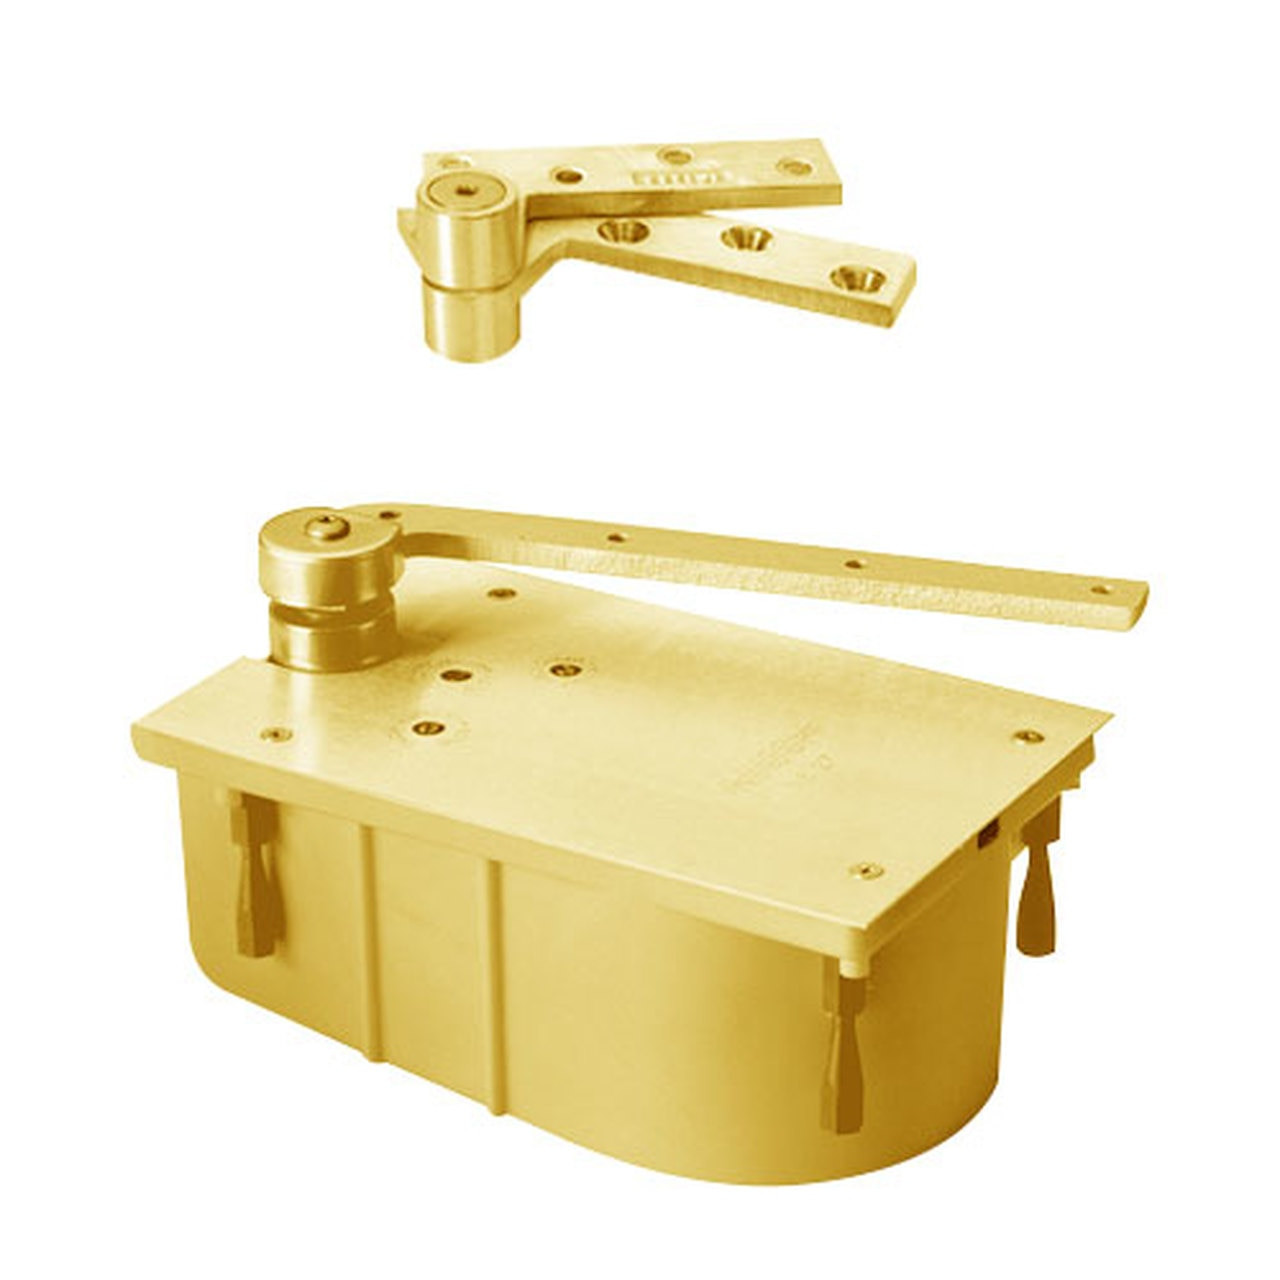 127-95S-LCC-LH-605 Rixson 27 Series Heavy Duty 3/4" Offset Hung Floor Closer in Bright Brass Finish